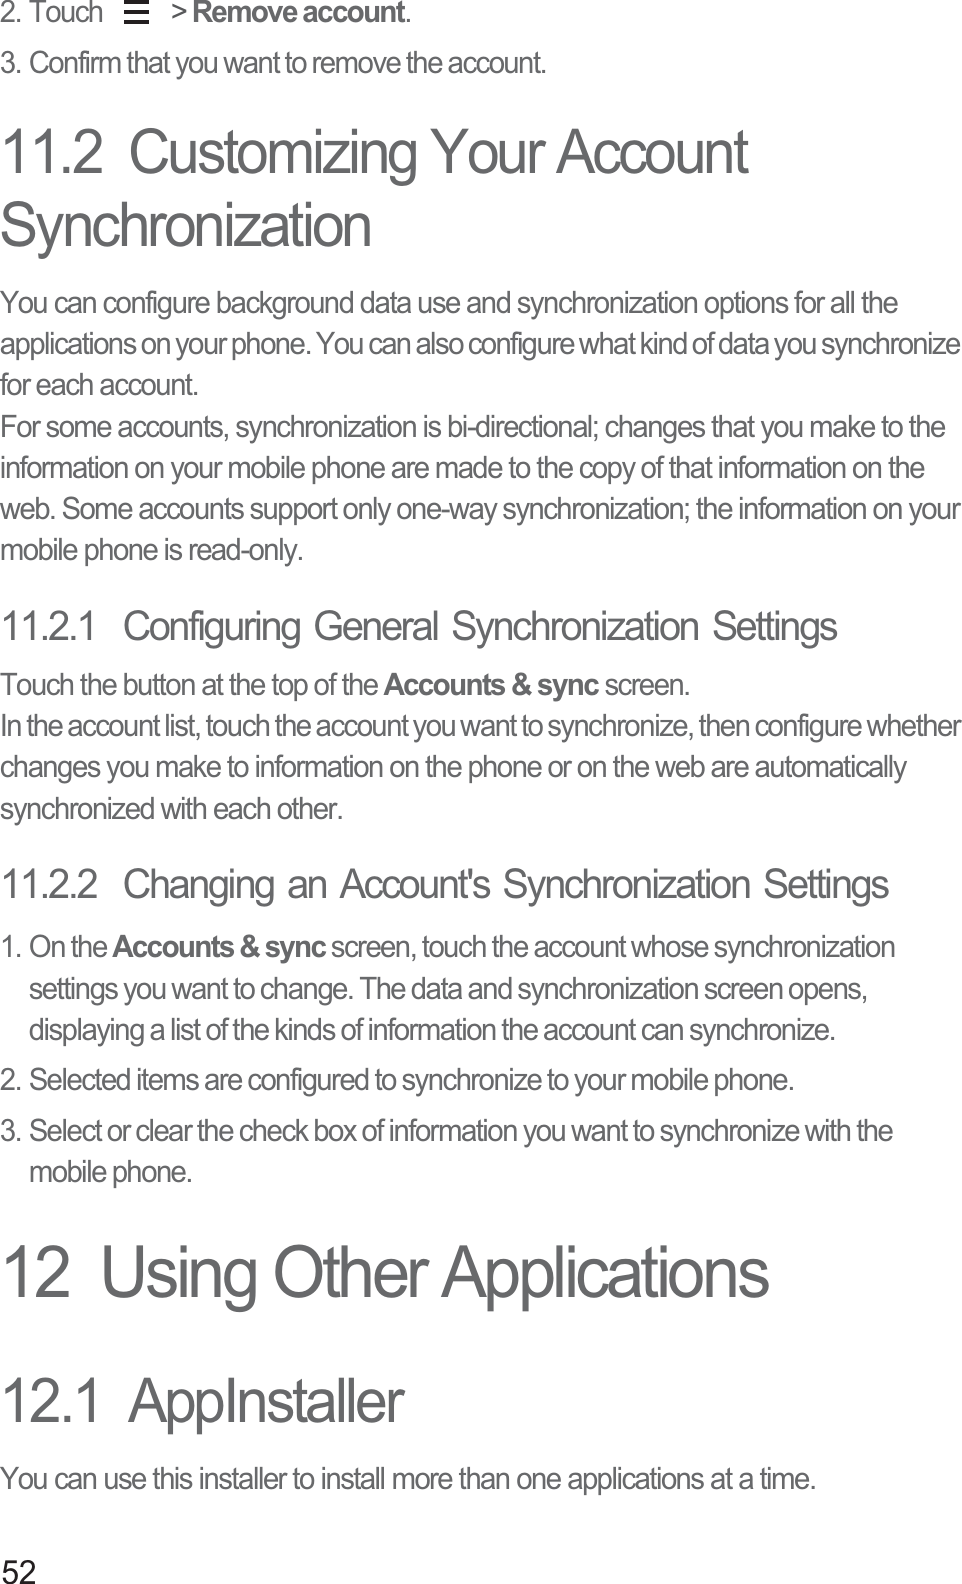 522. Touch   &gt; Remove account.3. Confirm that you want to remove the account.11.2  Customizing Your Account SynchronizationYou can configure background data use and synchronization options for all the applications on your phone. You can also configure what kind of data you synchronize for each account.For some accounts, synchronization is bi-directional; changes that you make to the information on your mobile phone are made to the copy of that information on the web. Some accounts support only one-way synchronization; the information on your mobile phone is read-only.11.2.1  Configuring General Synchronization SettingsTouch the button at the top of the Accounts &amp; sync screen. In the account list, touch the account you want to synchronize, then configure whether changes you make to information on the phone or on the web are automatically synchronized with each other.11.2.2  Changing an Account&apos;s Synchronization Settings1. On the Accounts &amp; sync screen, touch the account whose synchronization settings you want to change. The data and synchronization screen opens, displaying a list of the kinds of information the account can synchronize.2. Selected items are configured to synchronize to your mobile phone.3. Select or clear the check box of information you want to synchronize with the mobile phone.12  Using Other Applications12.1  AppInstallerYou can use this installer to install more than one applications at a time.